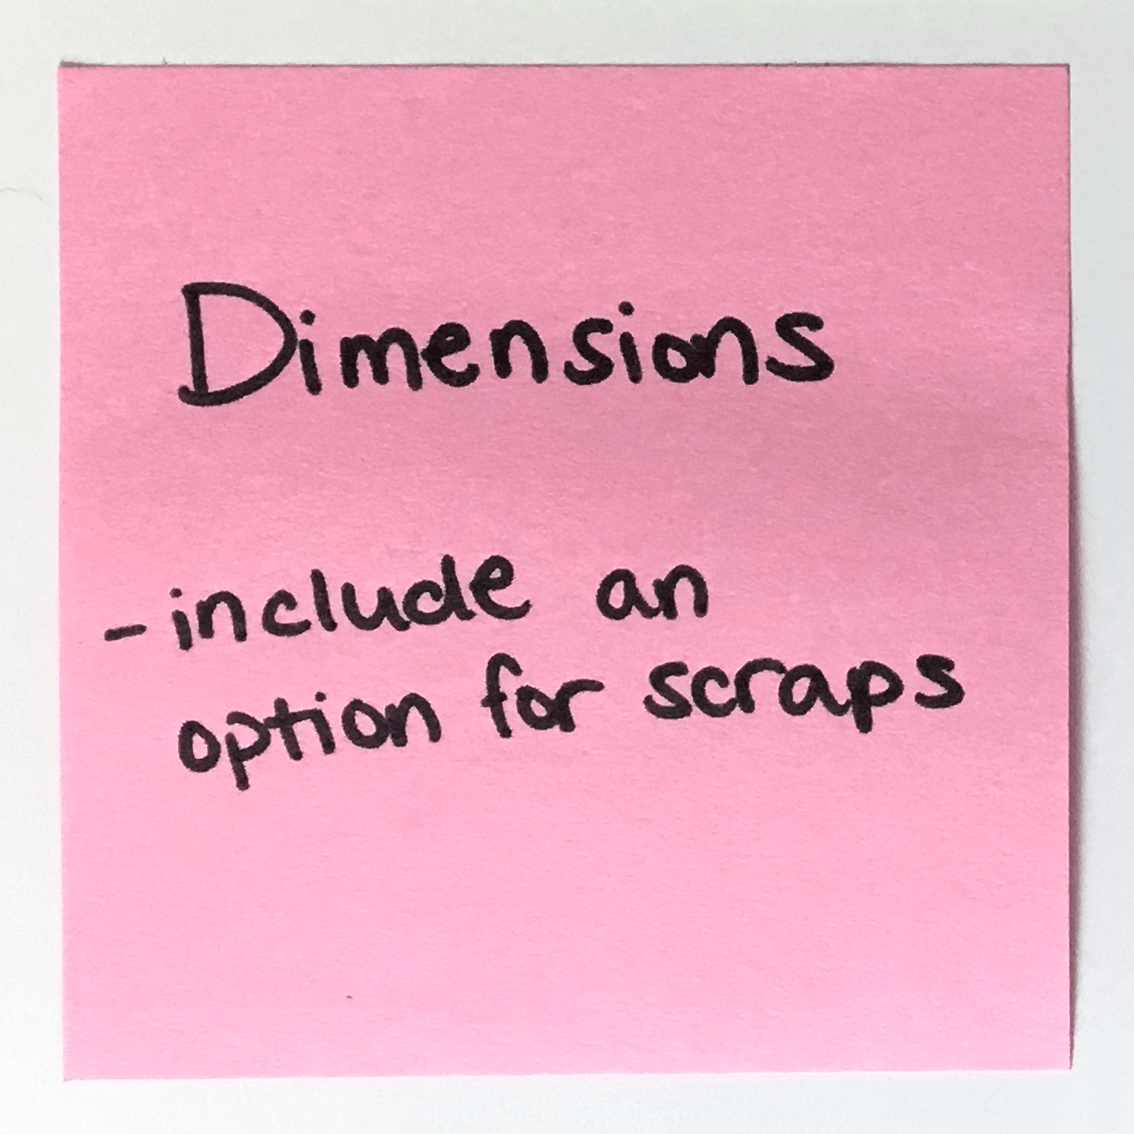 Post It with writing: 'Dimensions -include an option for scraps'